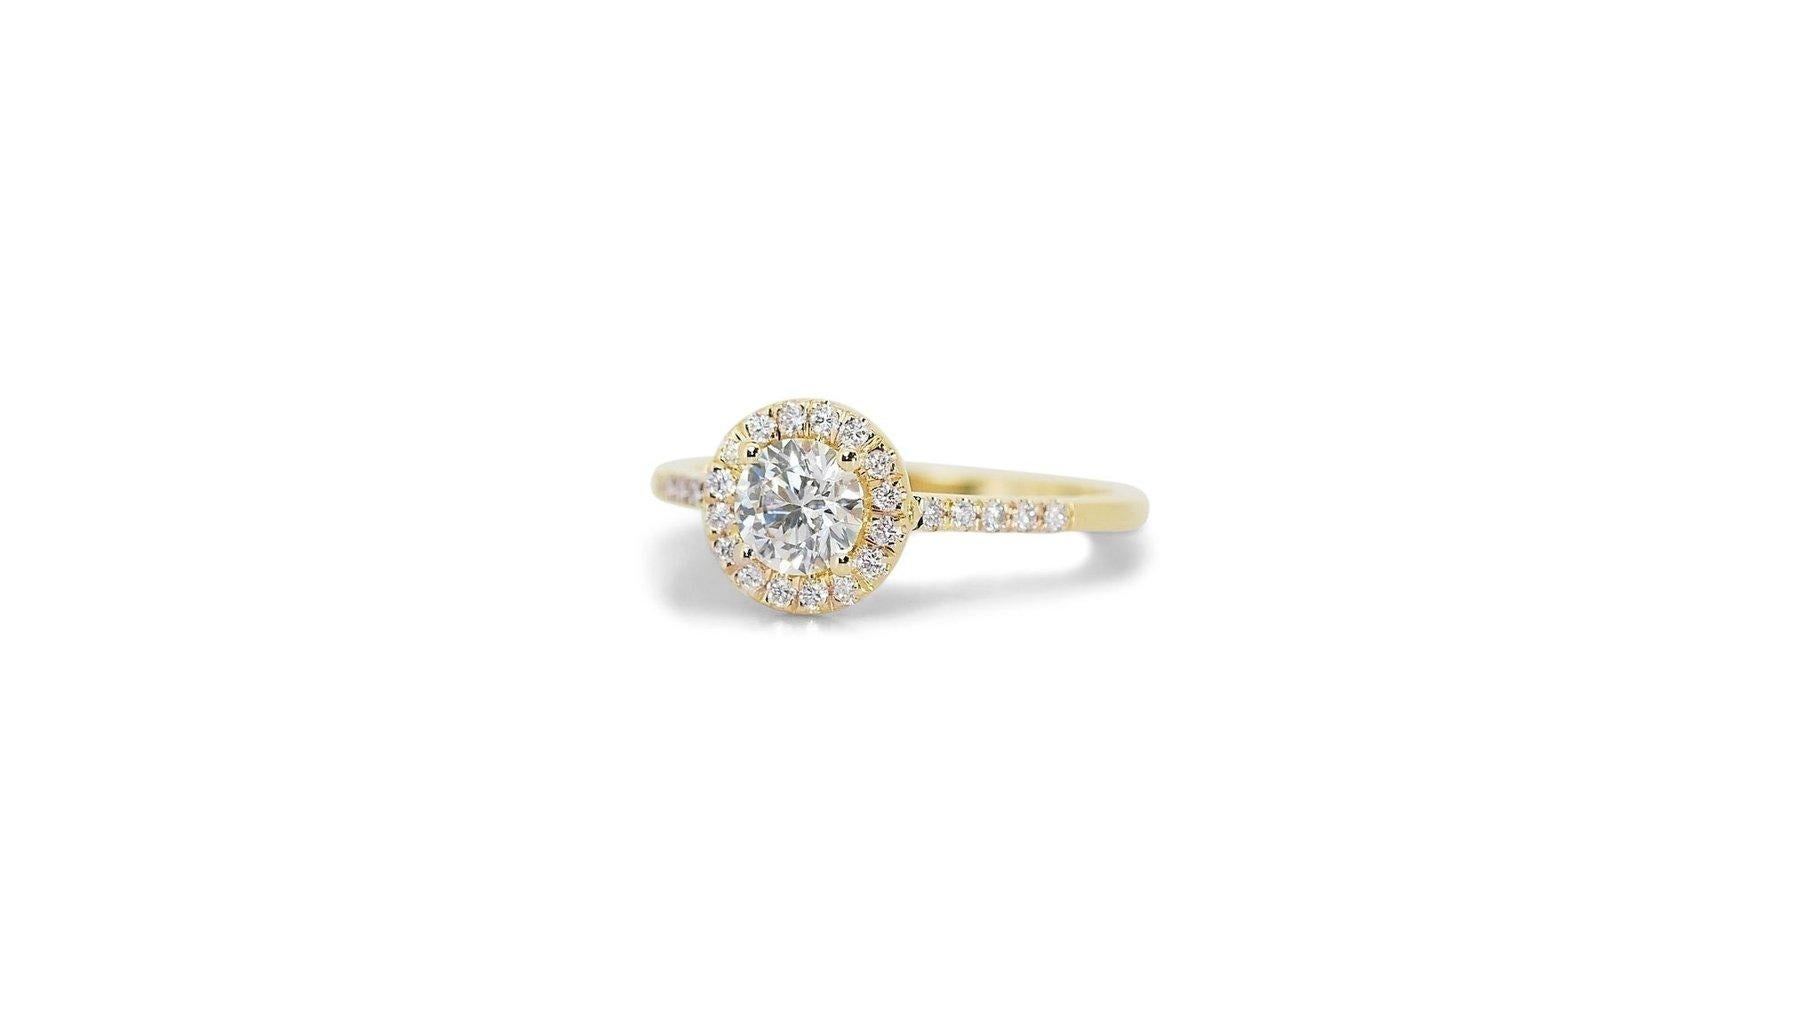 Dazzling 1.36ct Diamonds Halo Ring in 18k Yellow Gold - GIA Certified For Sale 3